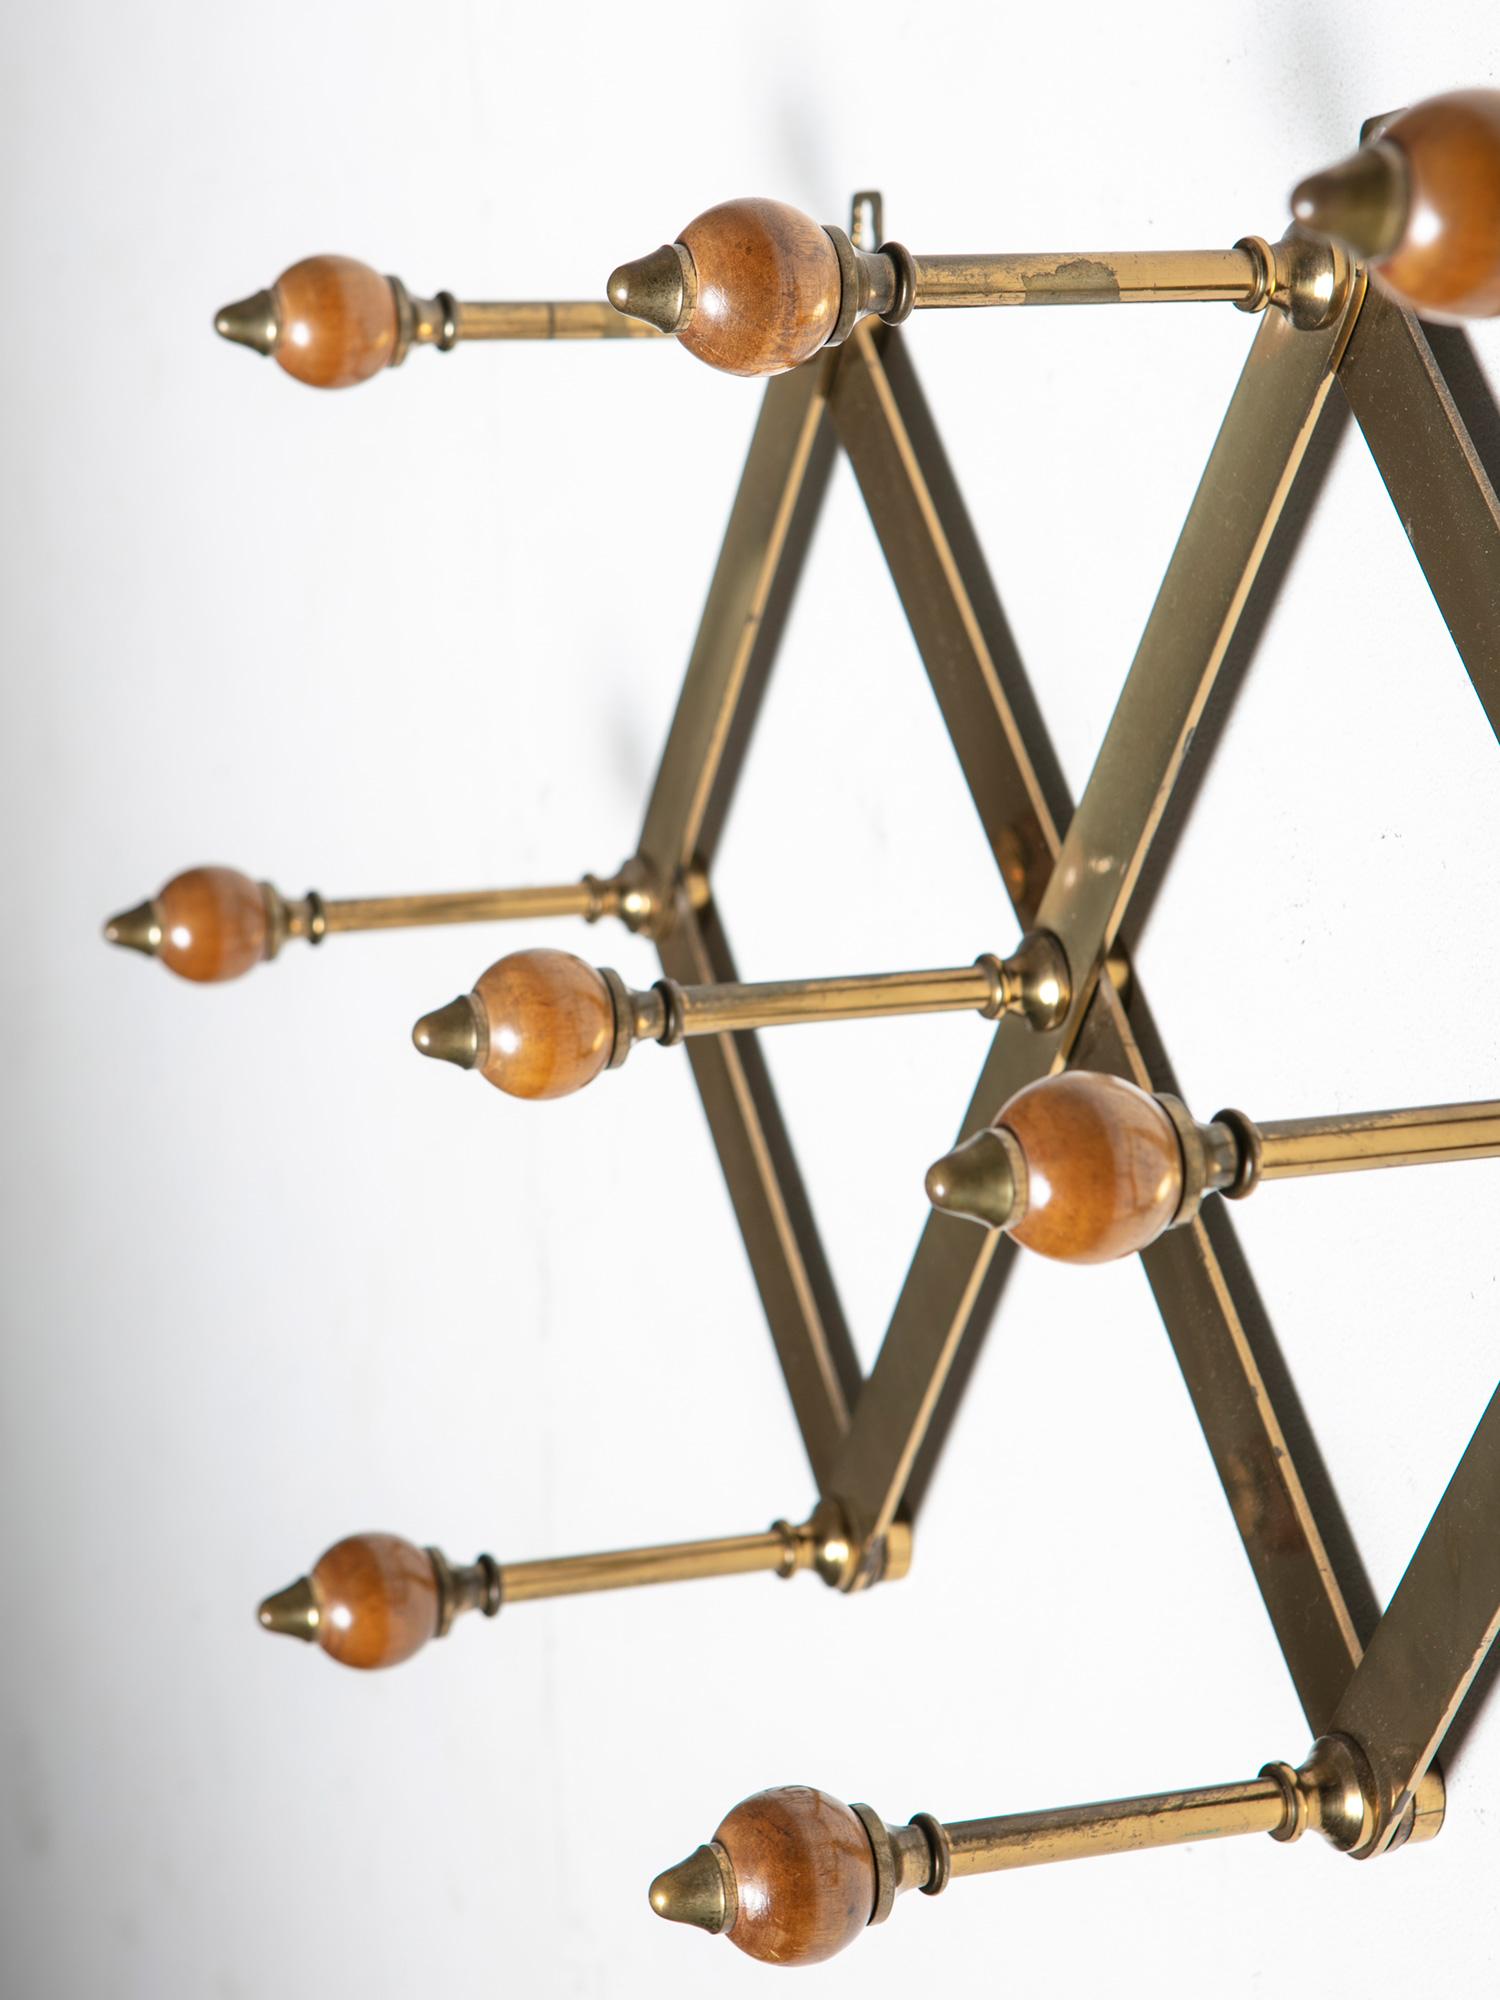 Expandable coat rack by Luigi Caccia Dominioni for Azucena.
Pantograph brass frame and polished wood spheres.